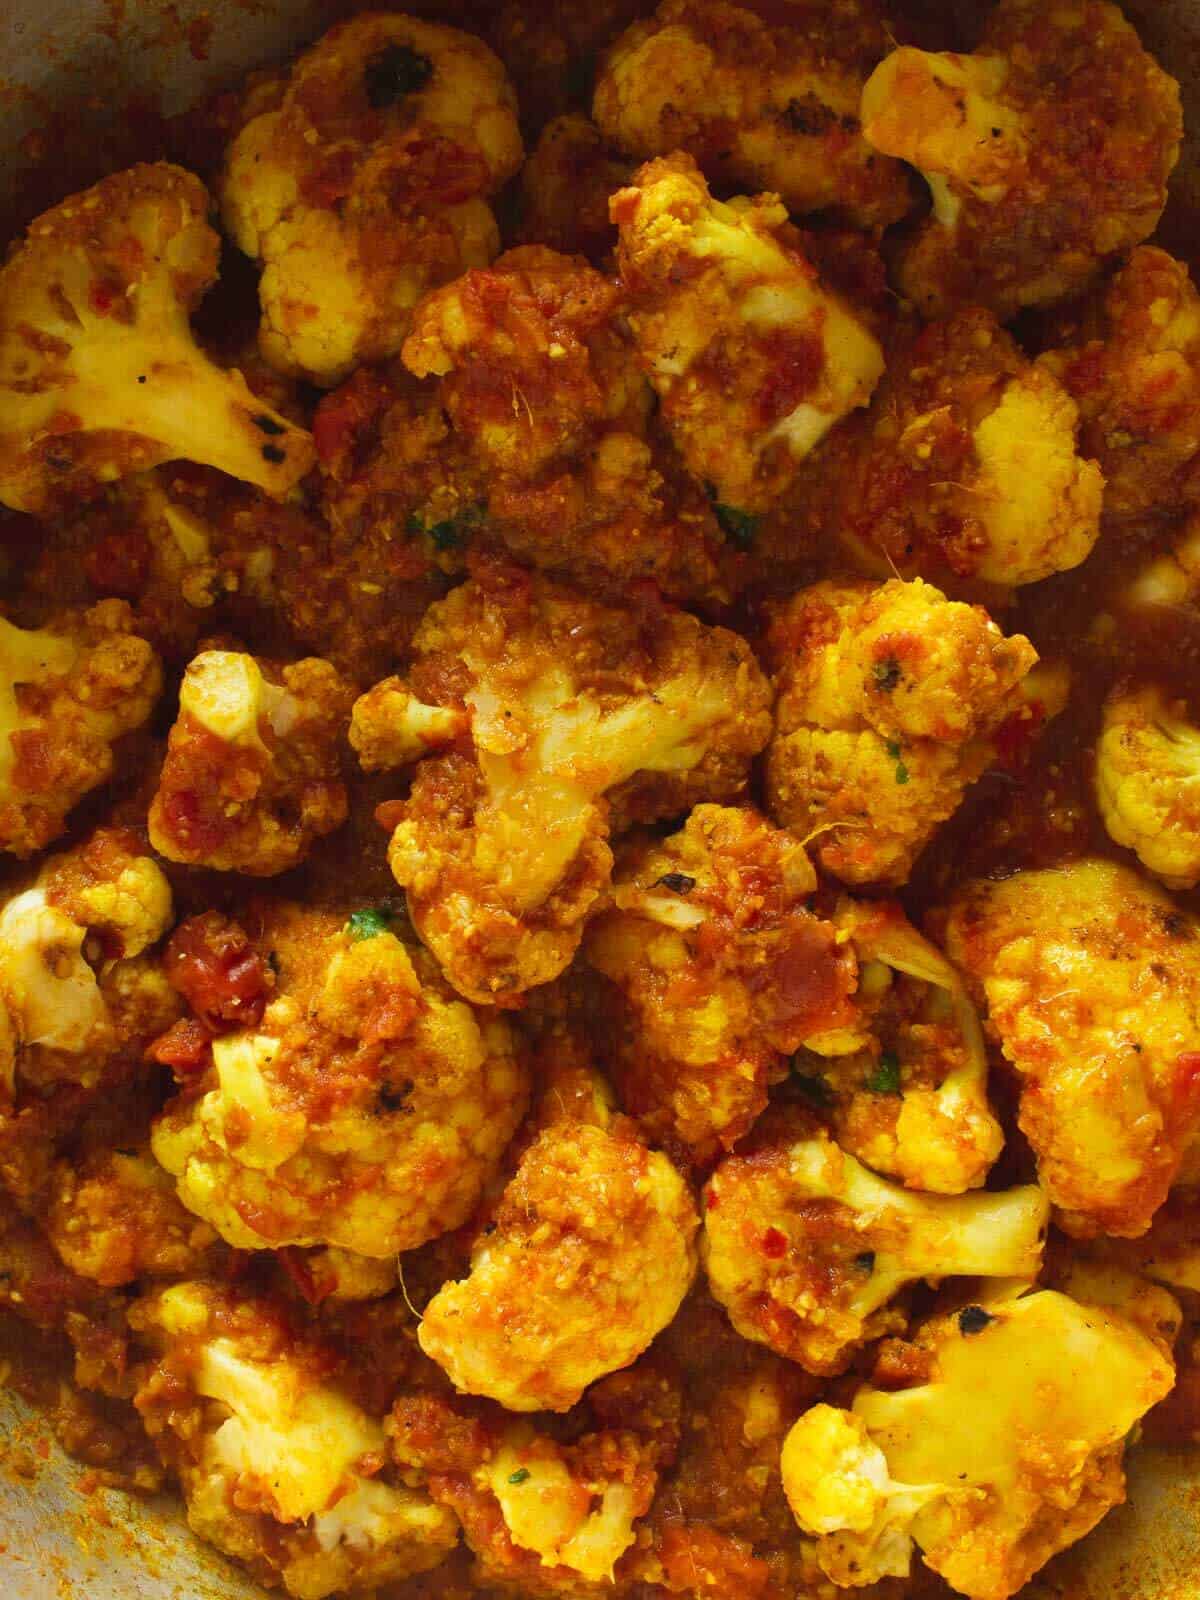 combine all of the ingredients of the curried cauliflower